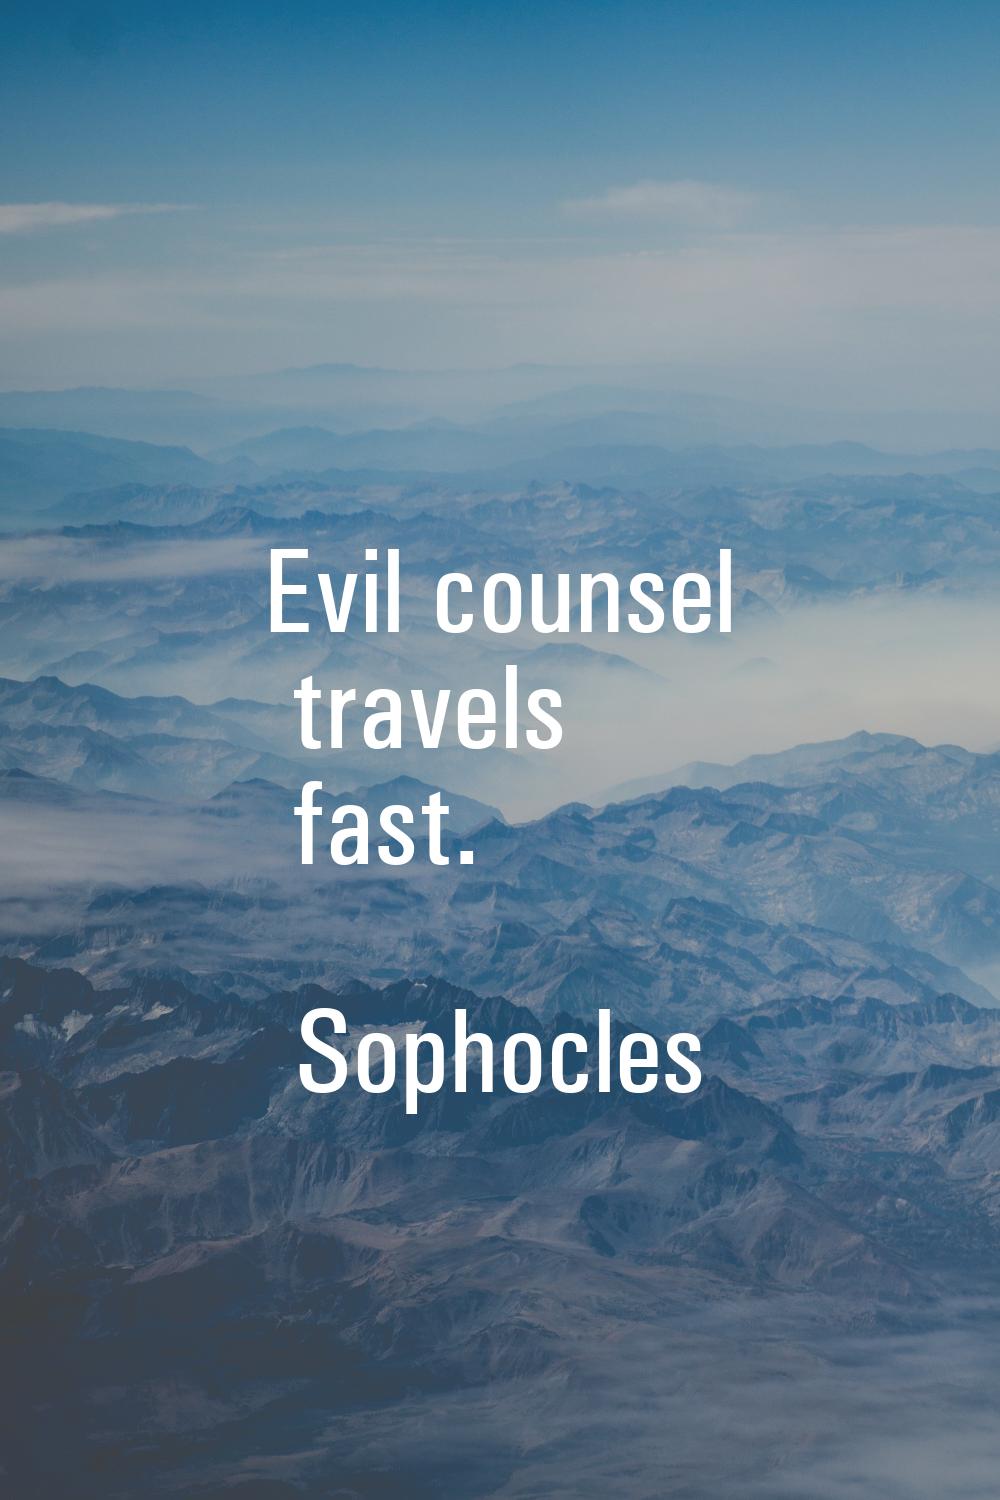 Evil counsel travels fast.